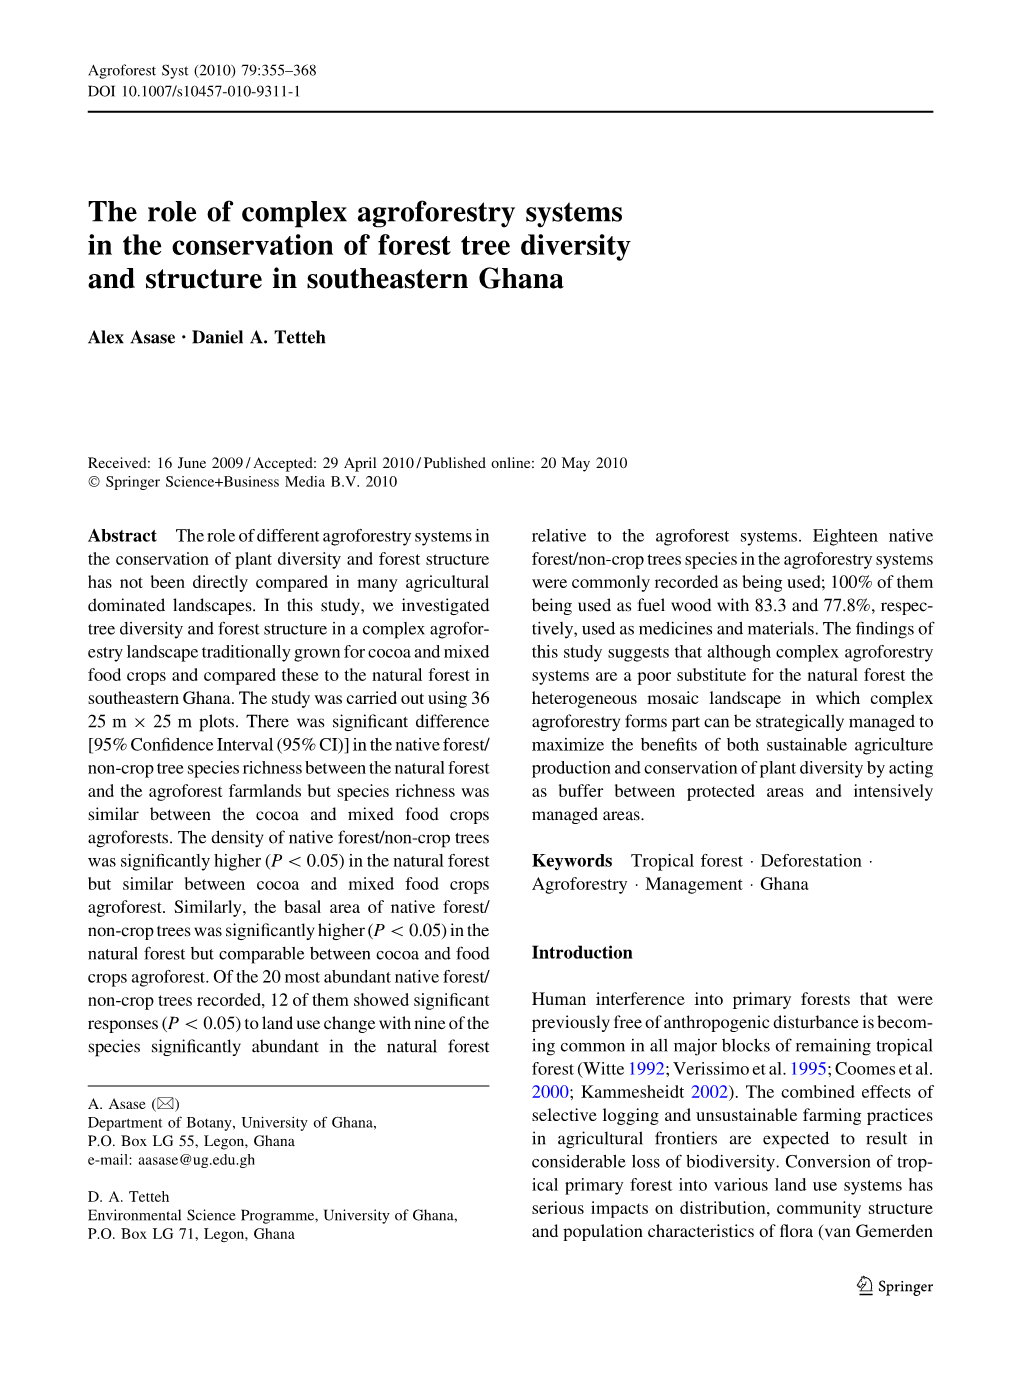 The Role of Complex Agroforestry Systems in the Conservation of Forest Tree Diversity and Structure in Southeastern Ghana